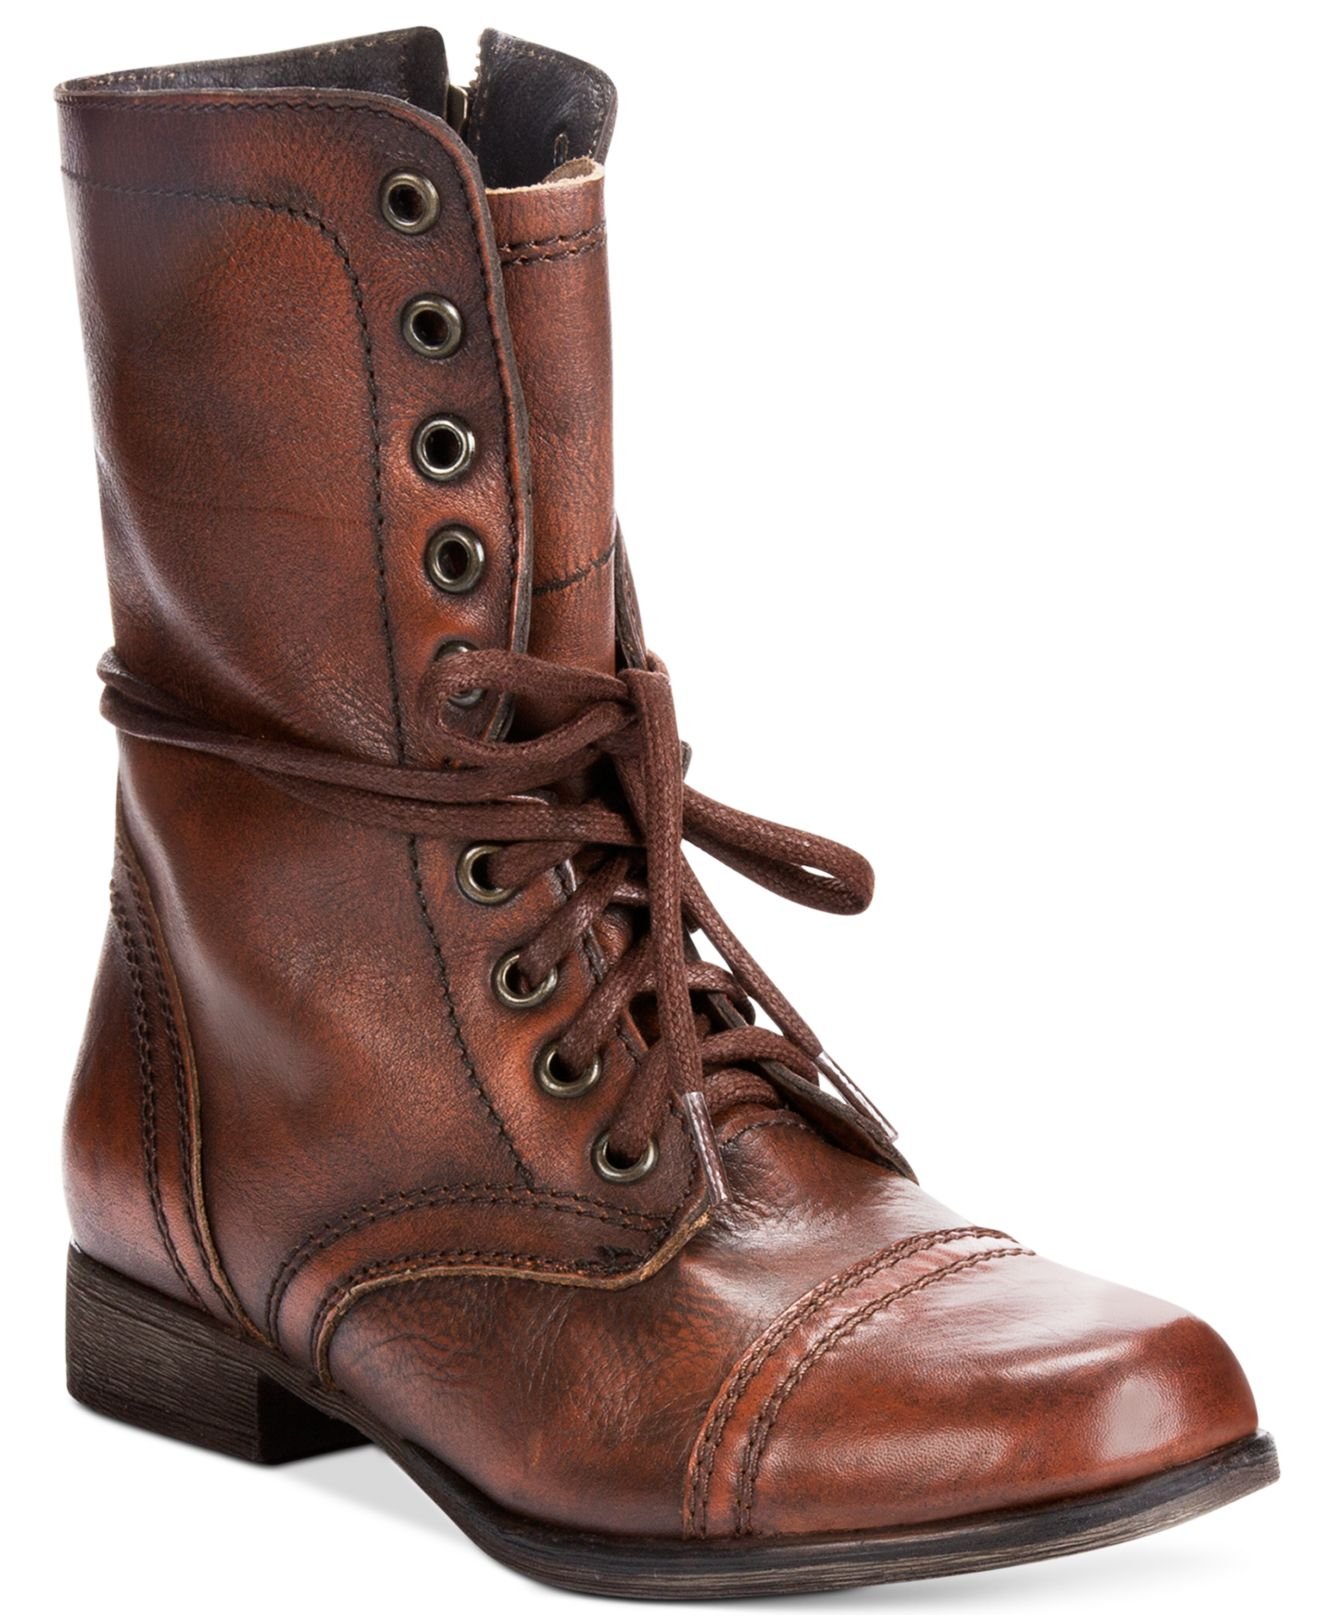 Steve Madden Leather Troopa Boots in Brown - Lyst